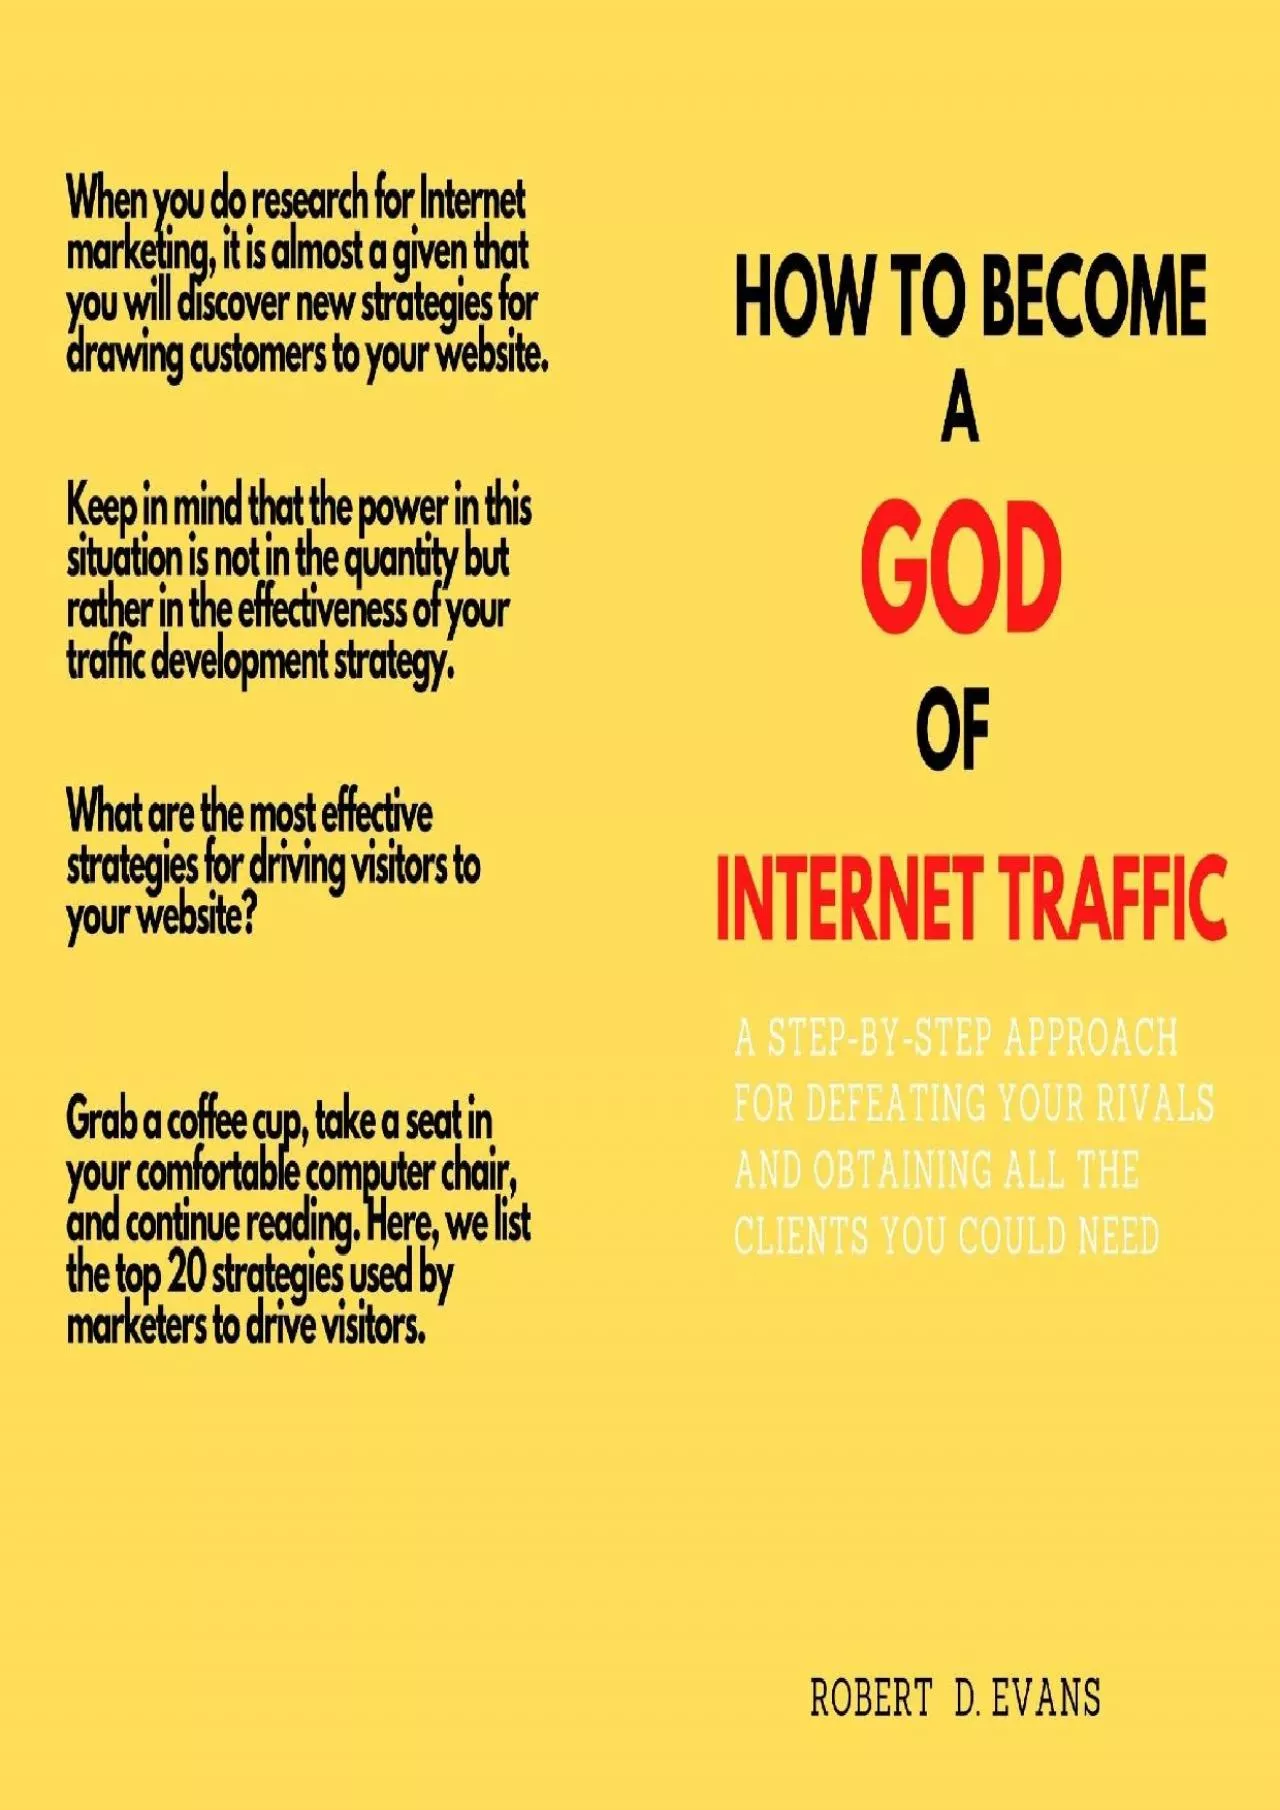 HOW TO BECOME A GOD OF INTERNET TRAFFIC: A step-by-step approach for defeating your rivals